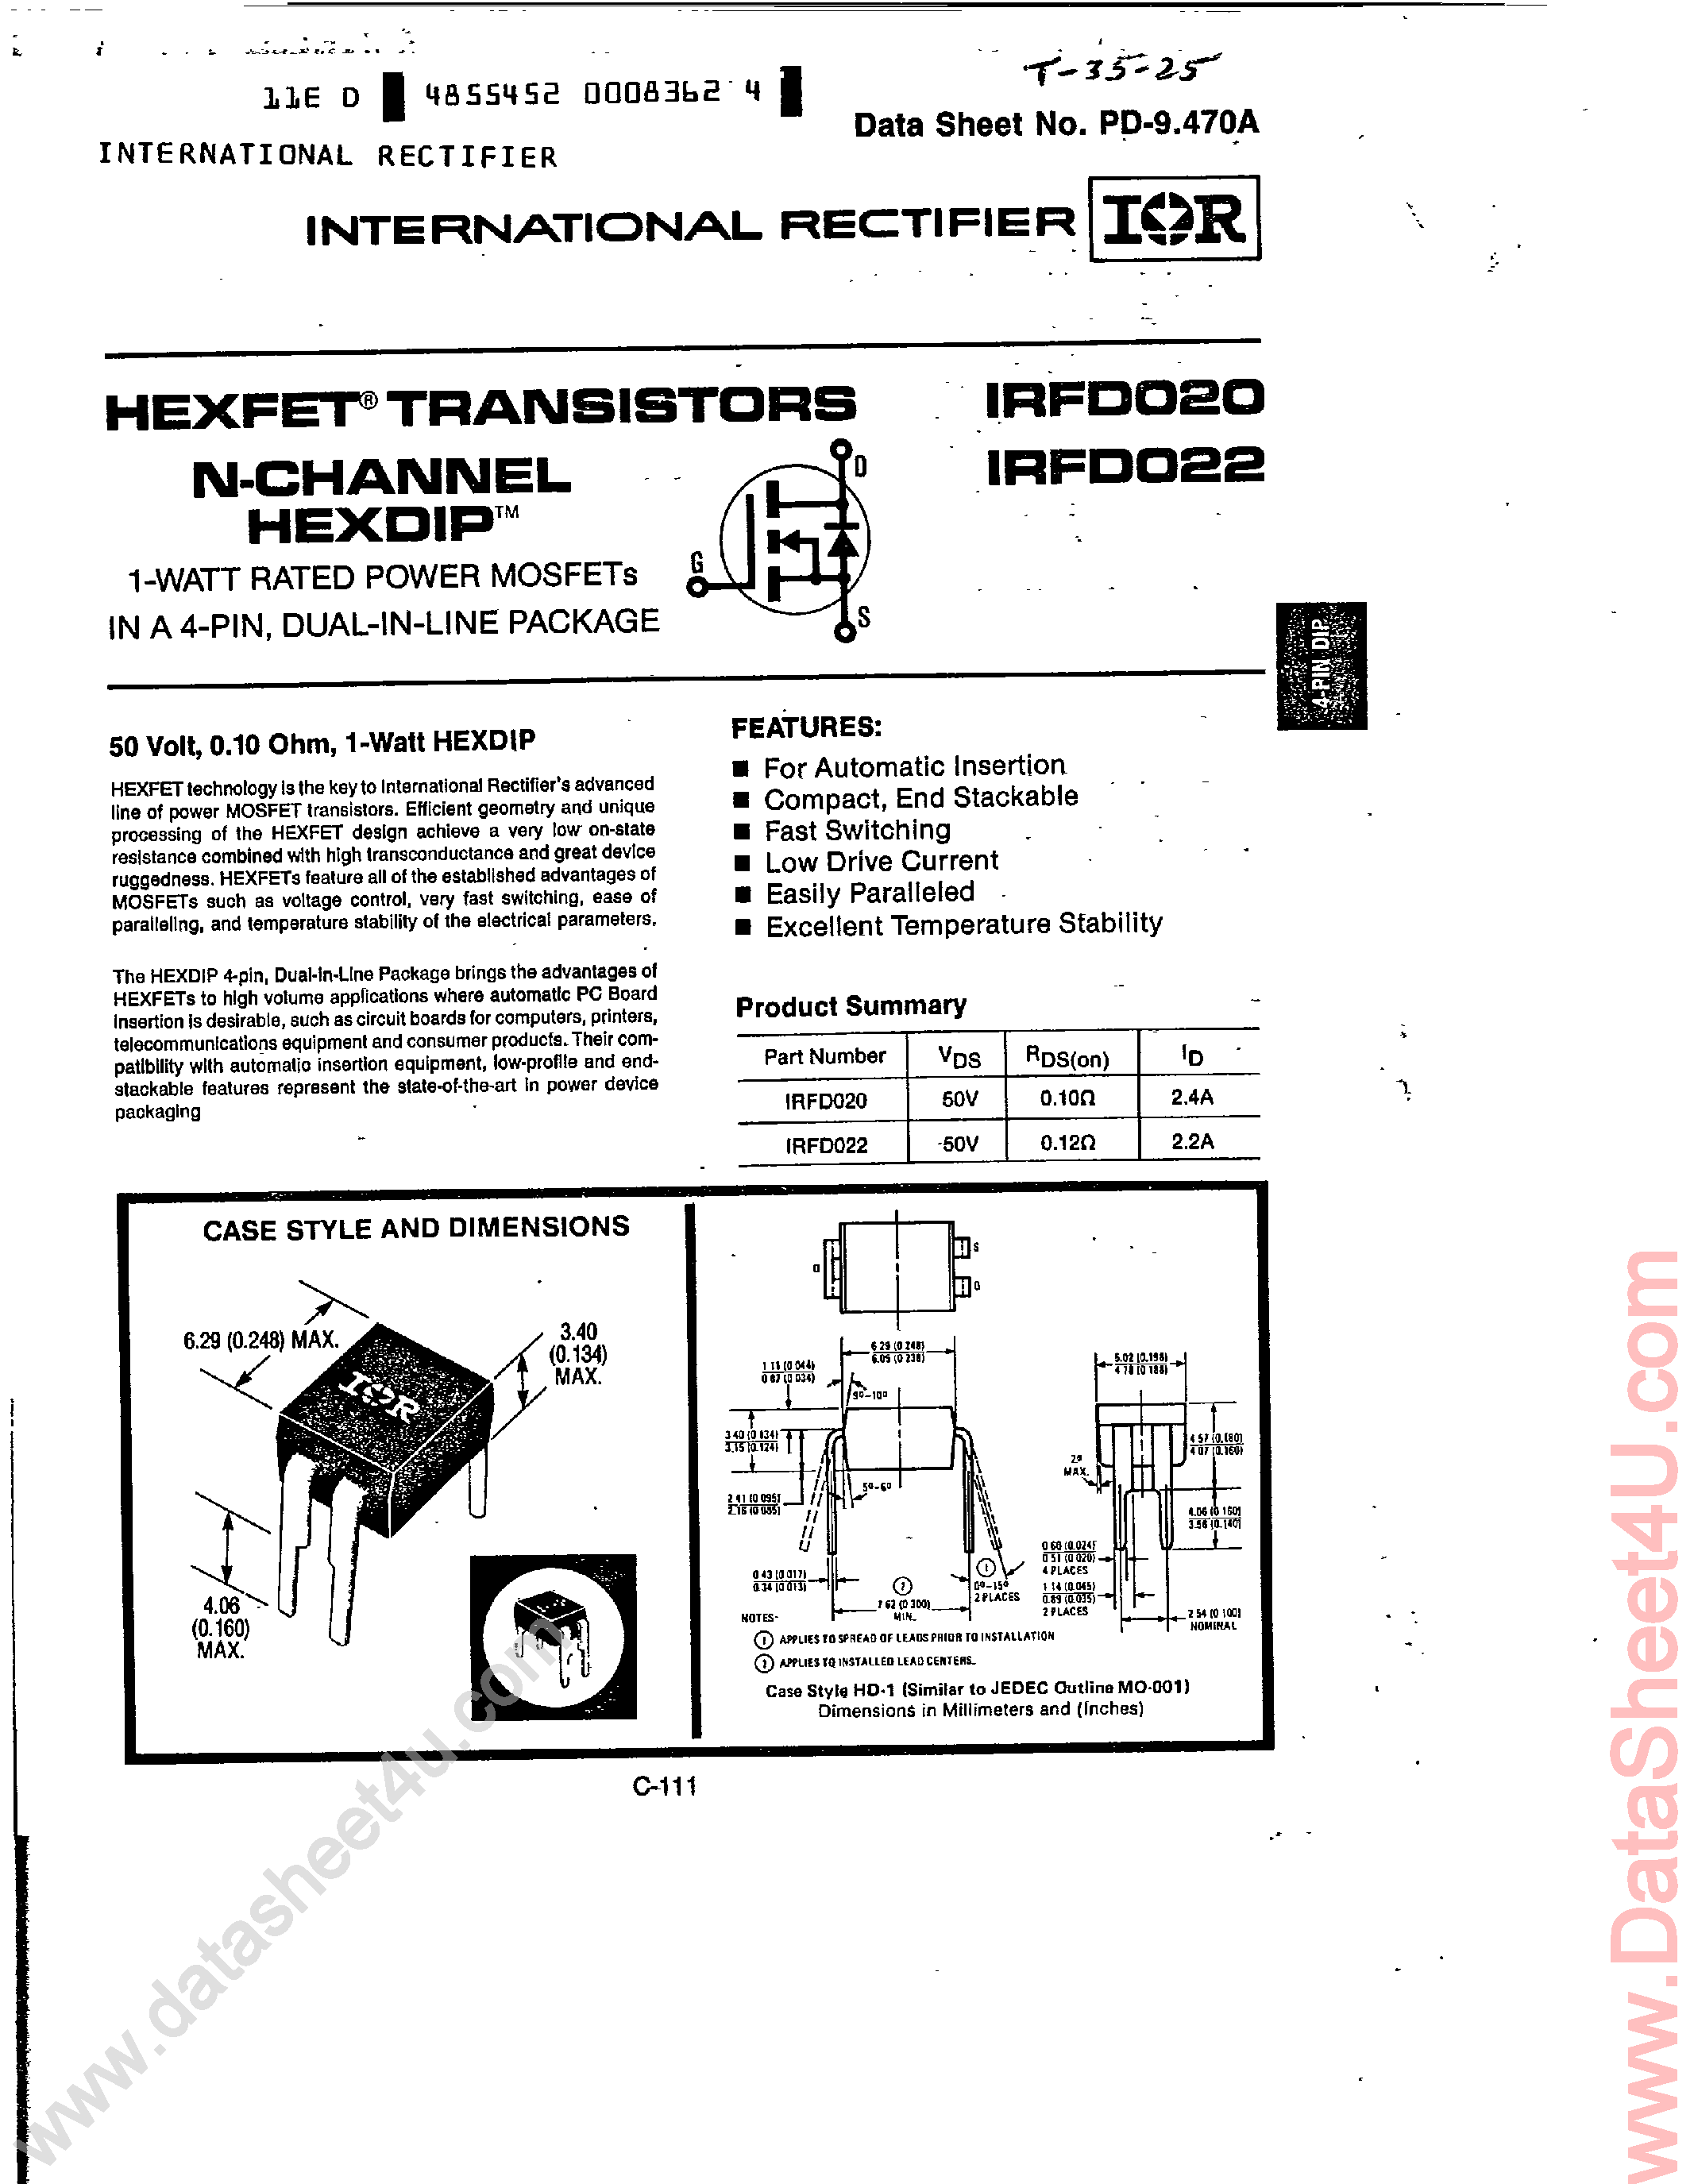 Даташит IRFD020 - (IRFD020 / IRFD022) HEXFET TRANSISTORS N-CHANNEL HEXDIP страница 1